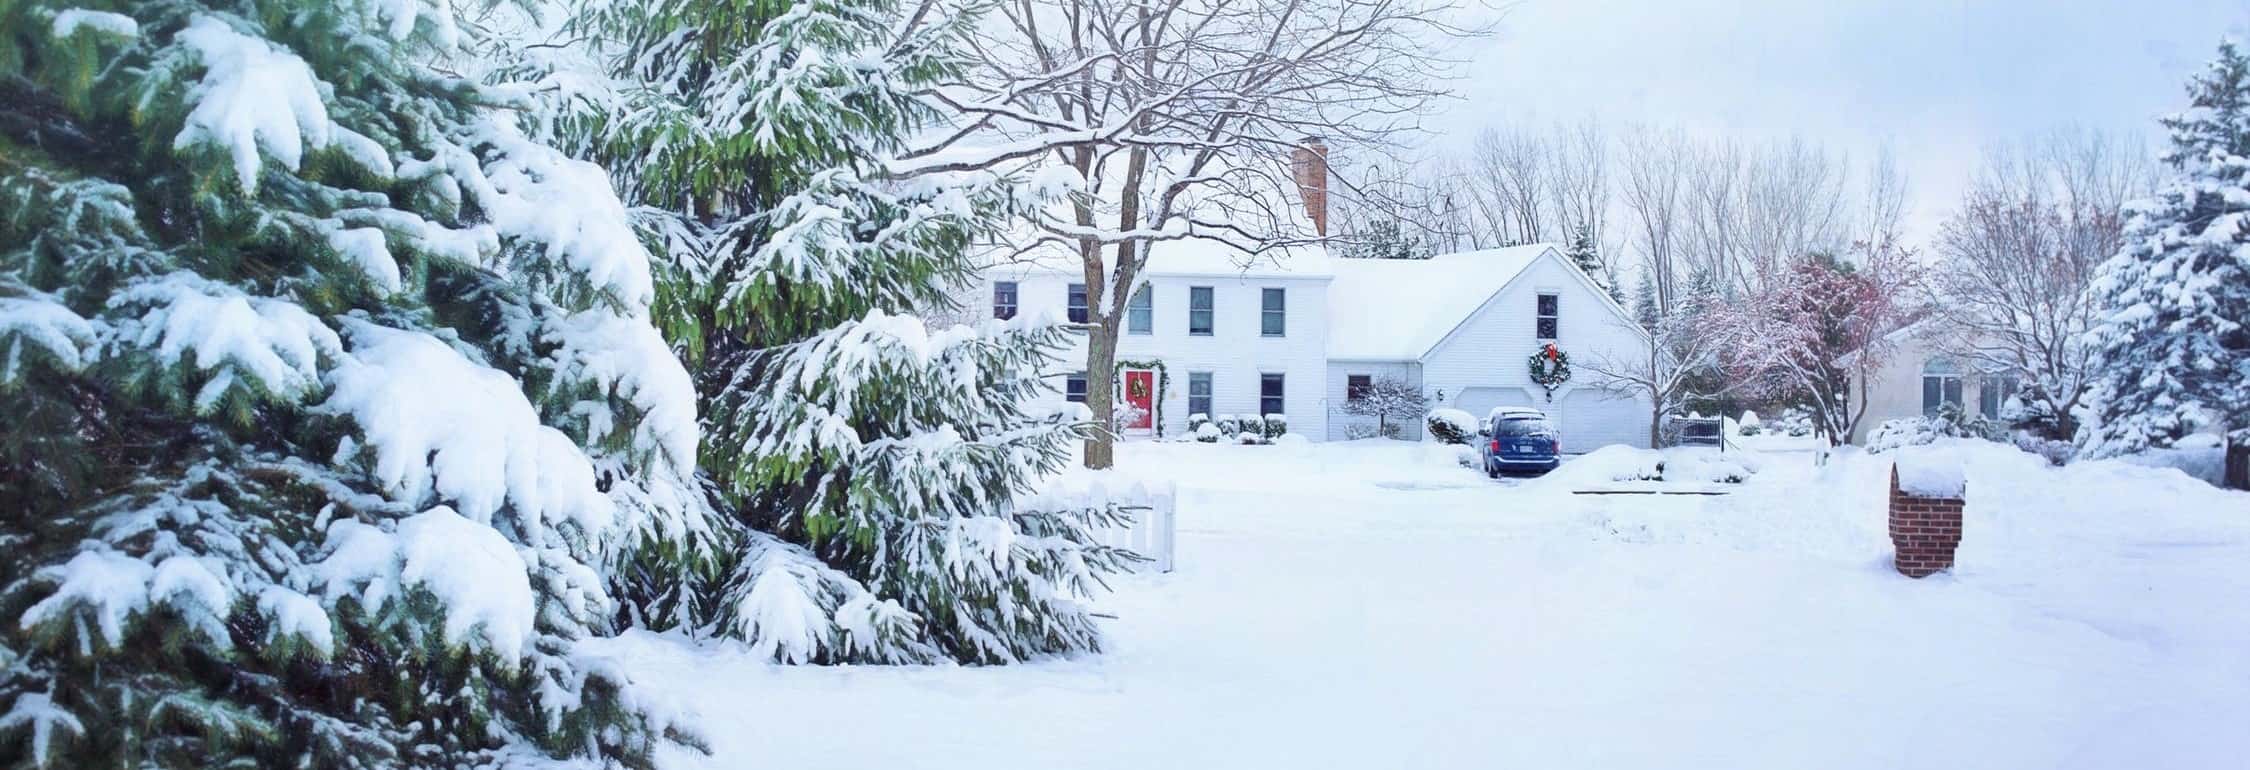 Exterior of home during snowy winter